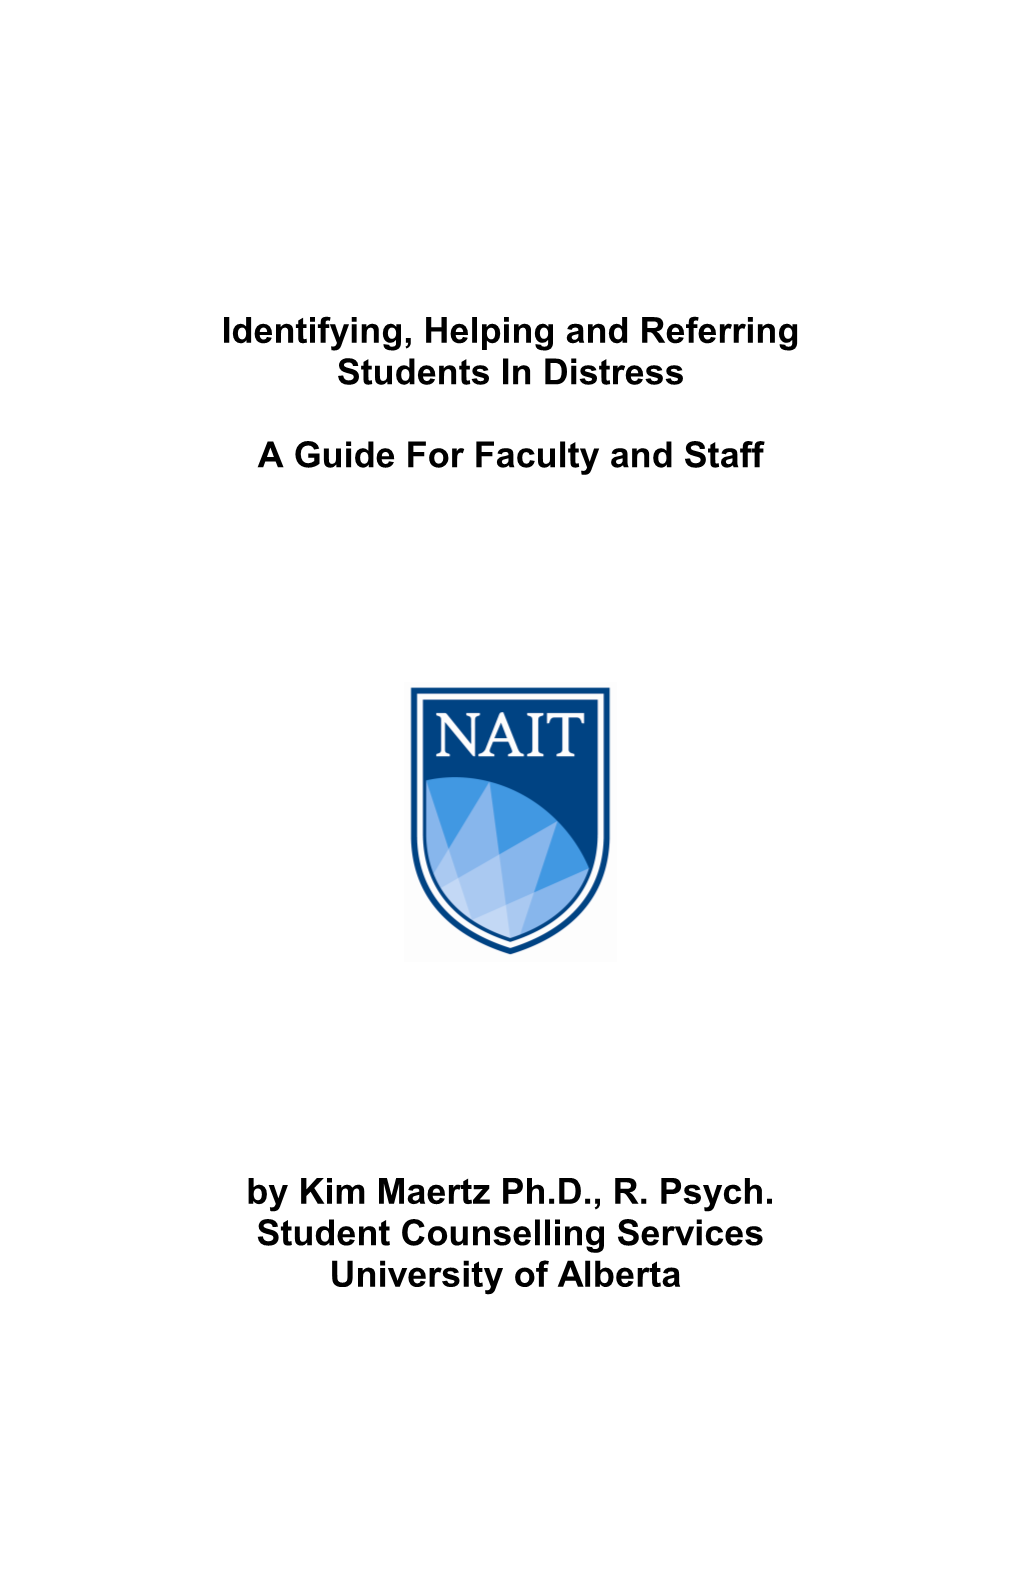 Identifying, Helping and Referring Students in Distress